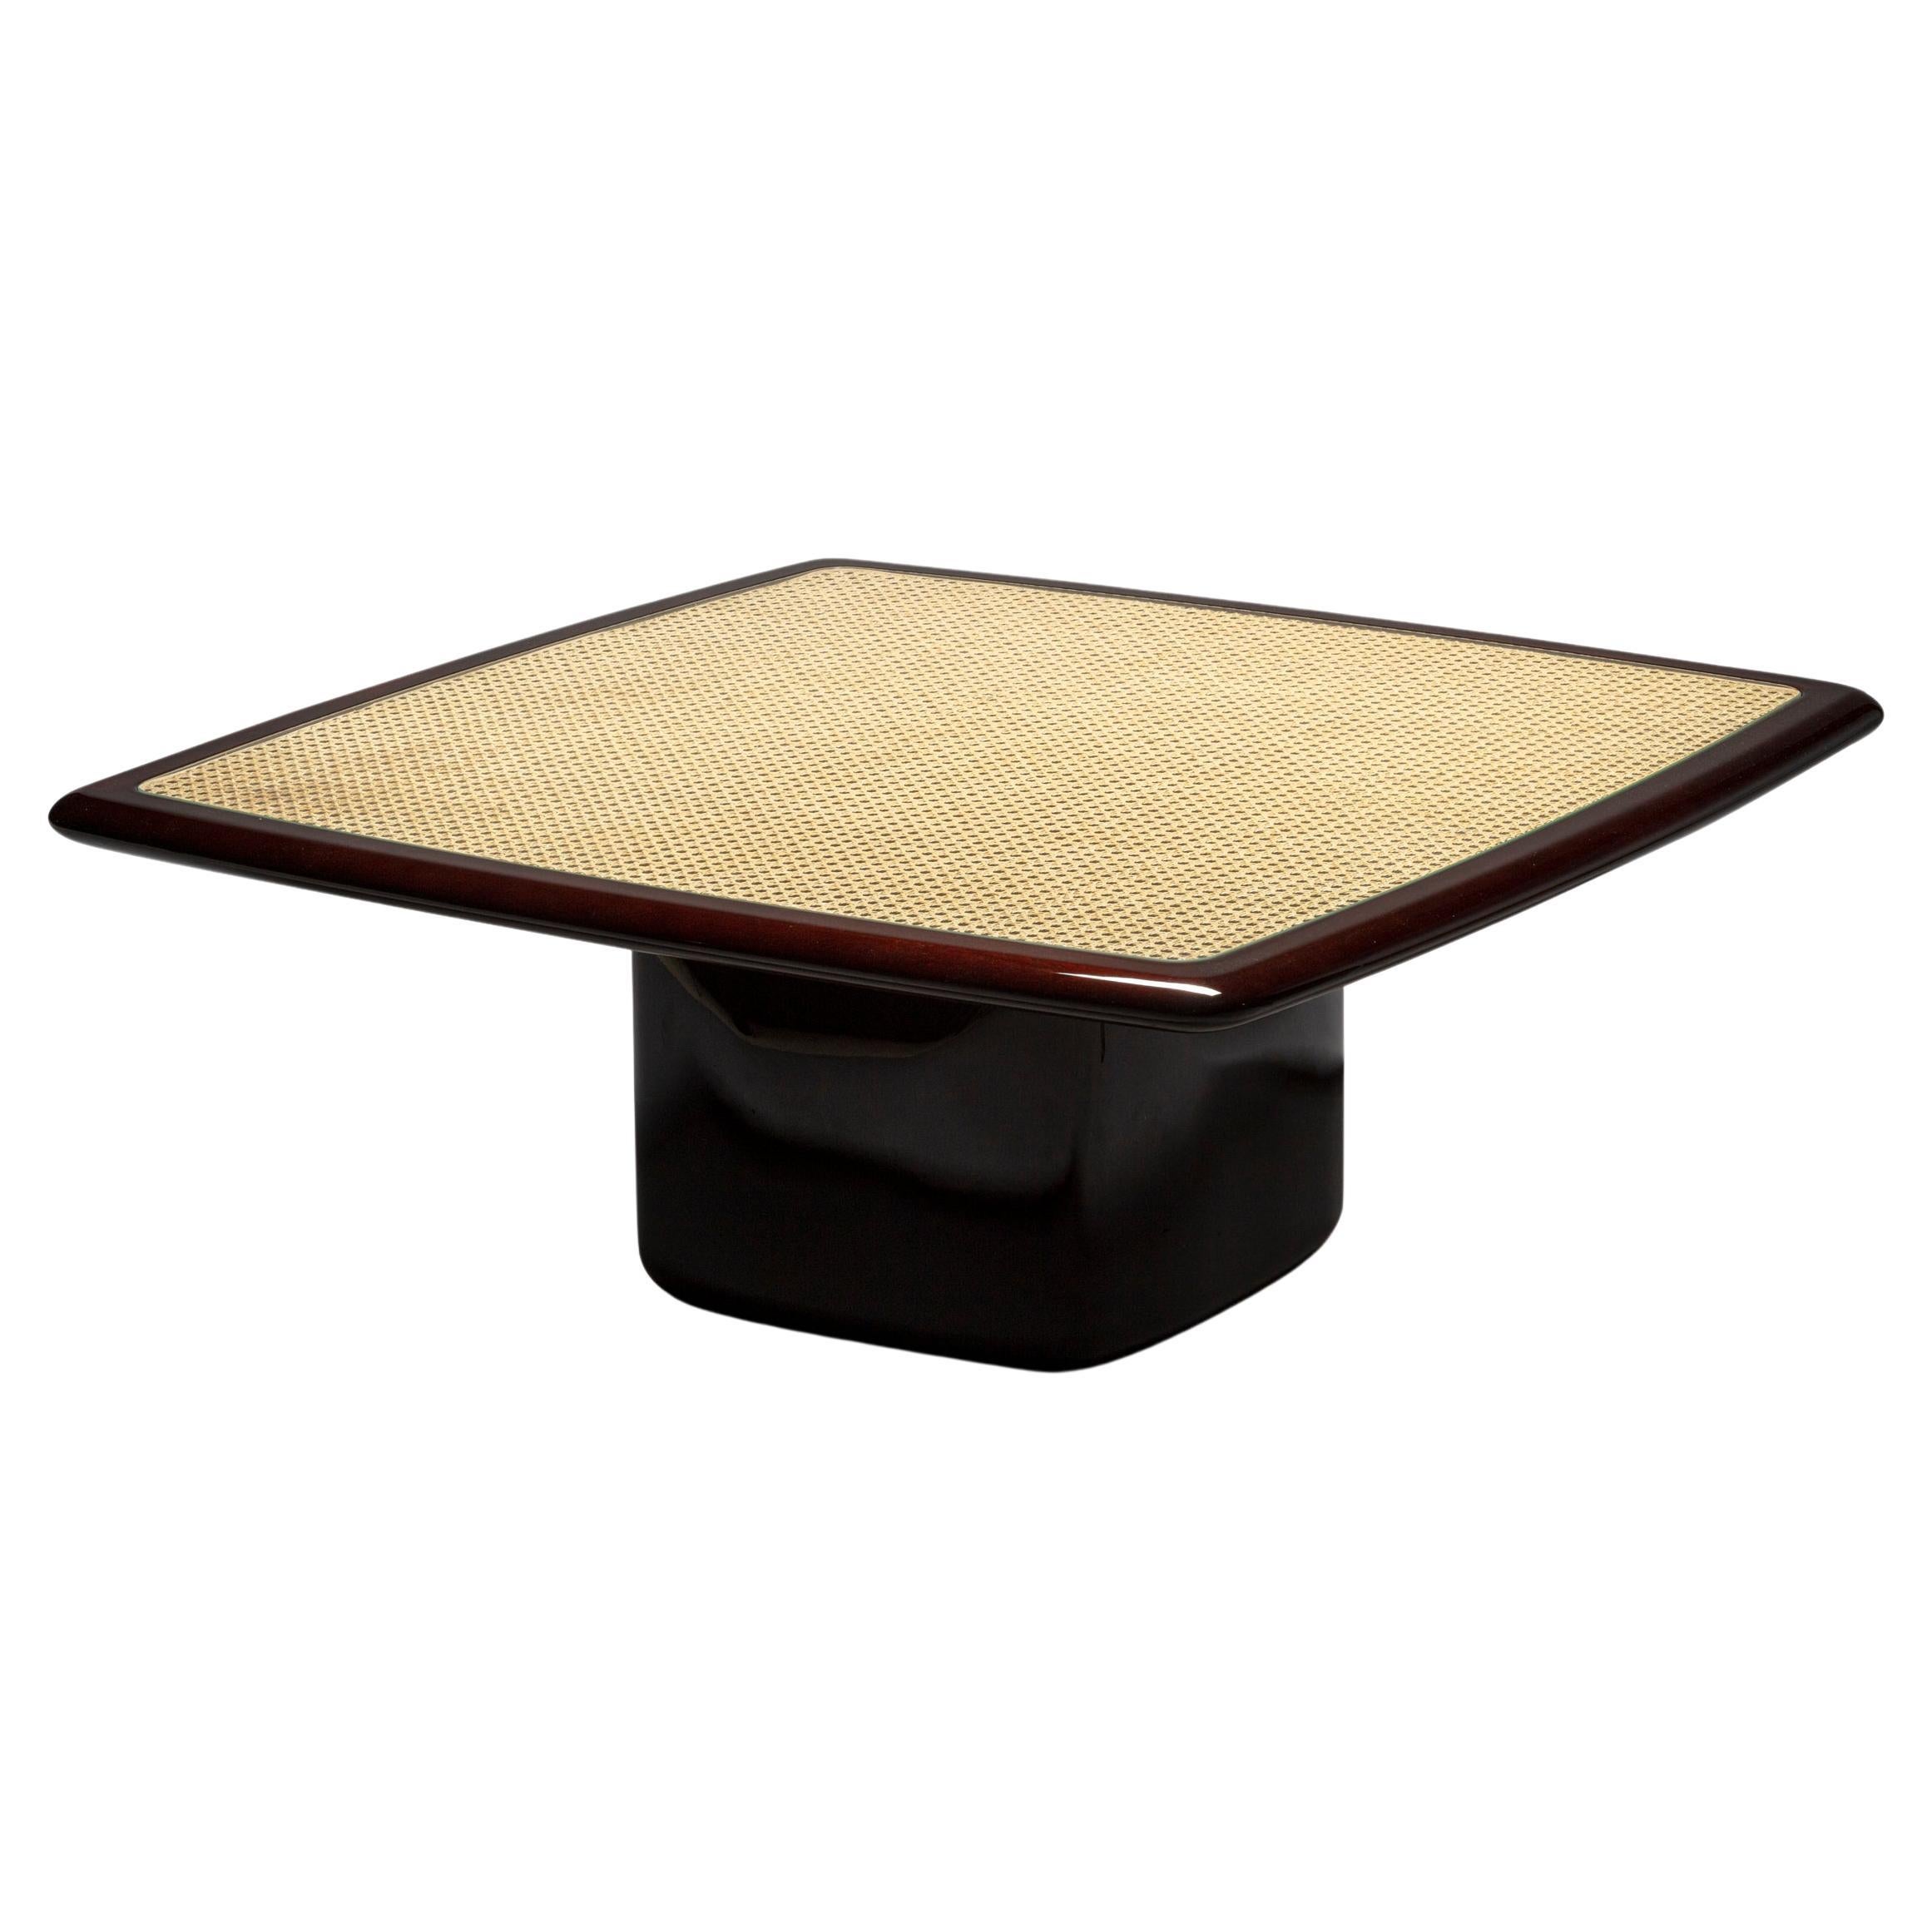 Bossa Square Coffee Table Mahogany Solid Wood, Handcrafted in Portugal by Duistt